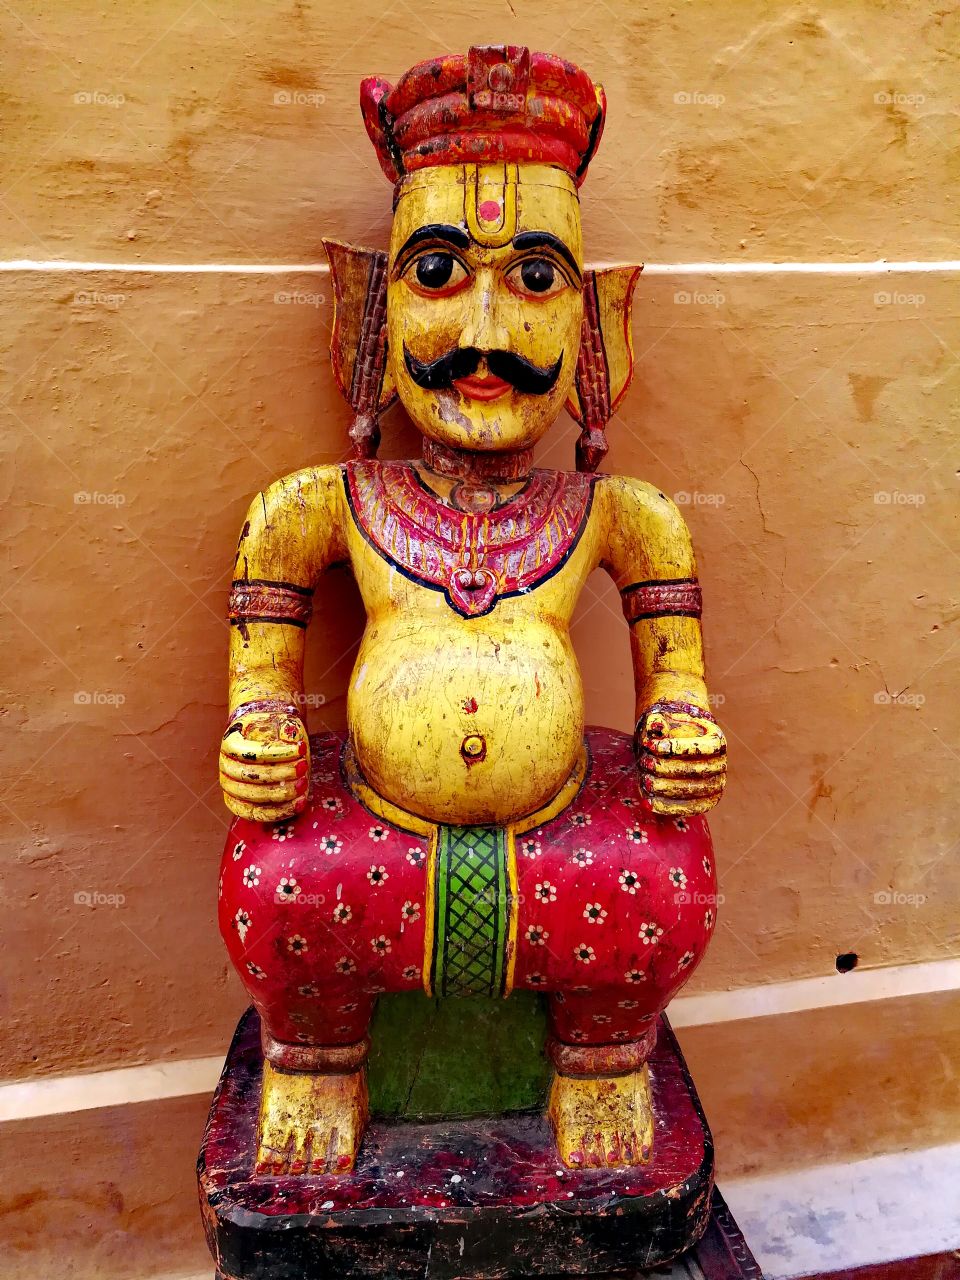 Mobile photography by honor 6x, Statue placed in Amer Fort in Jaipur Rajashthan India, This Statue resembles the Rajasthani Colours, Dress.